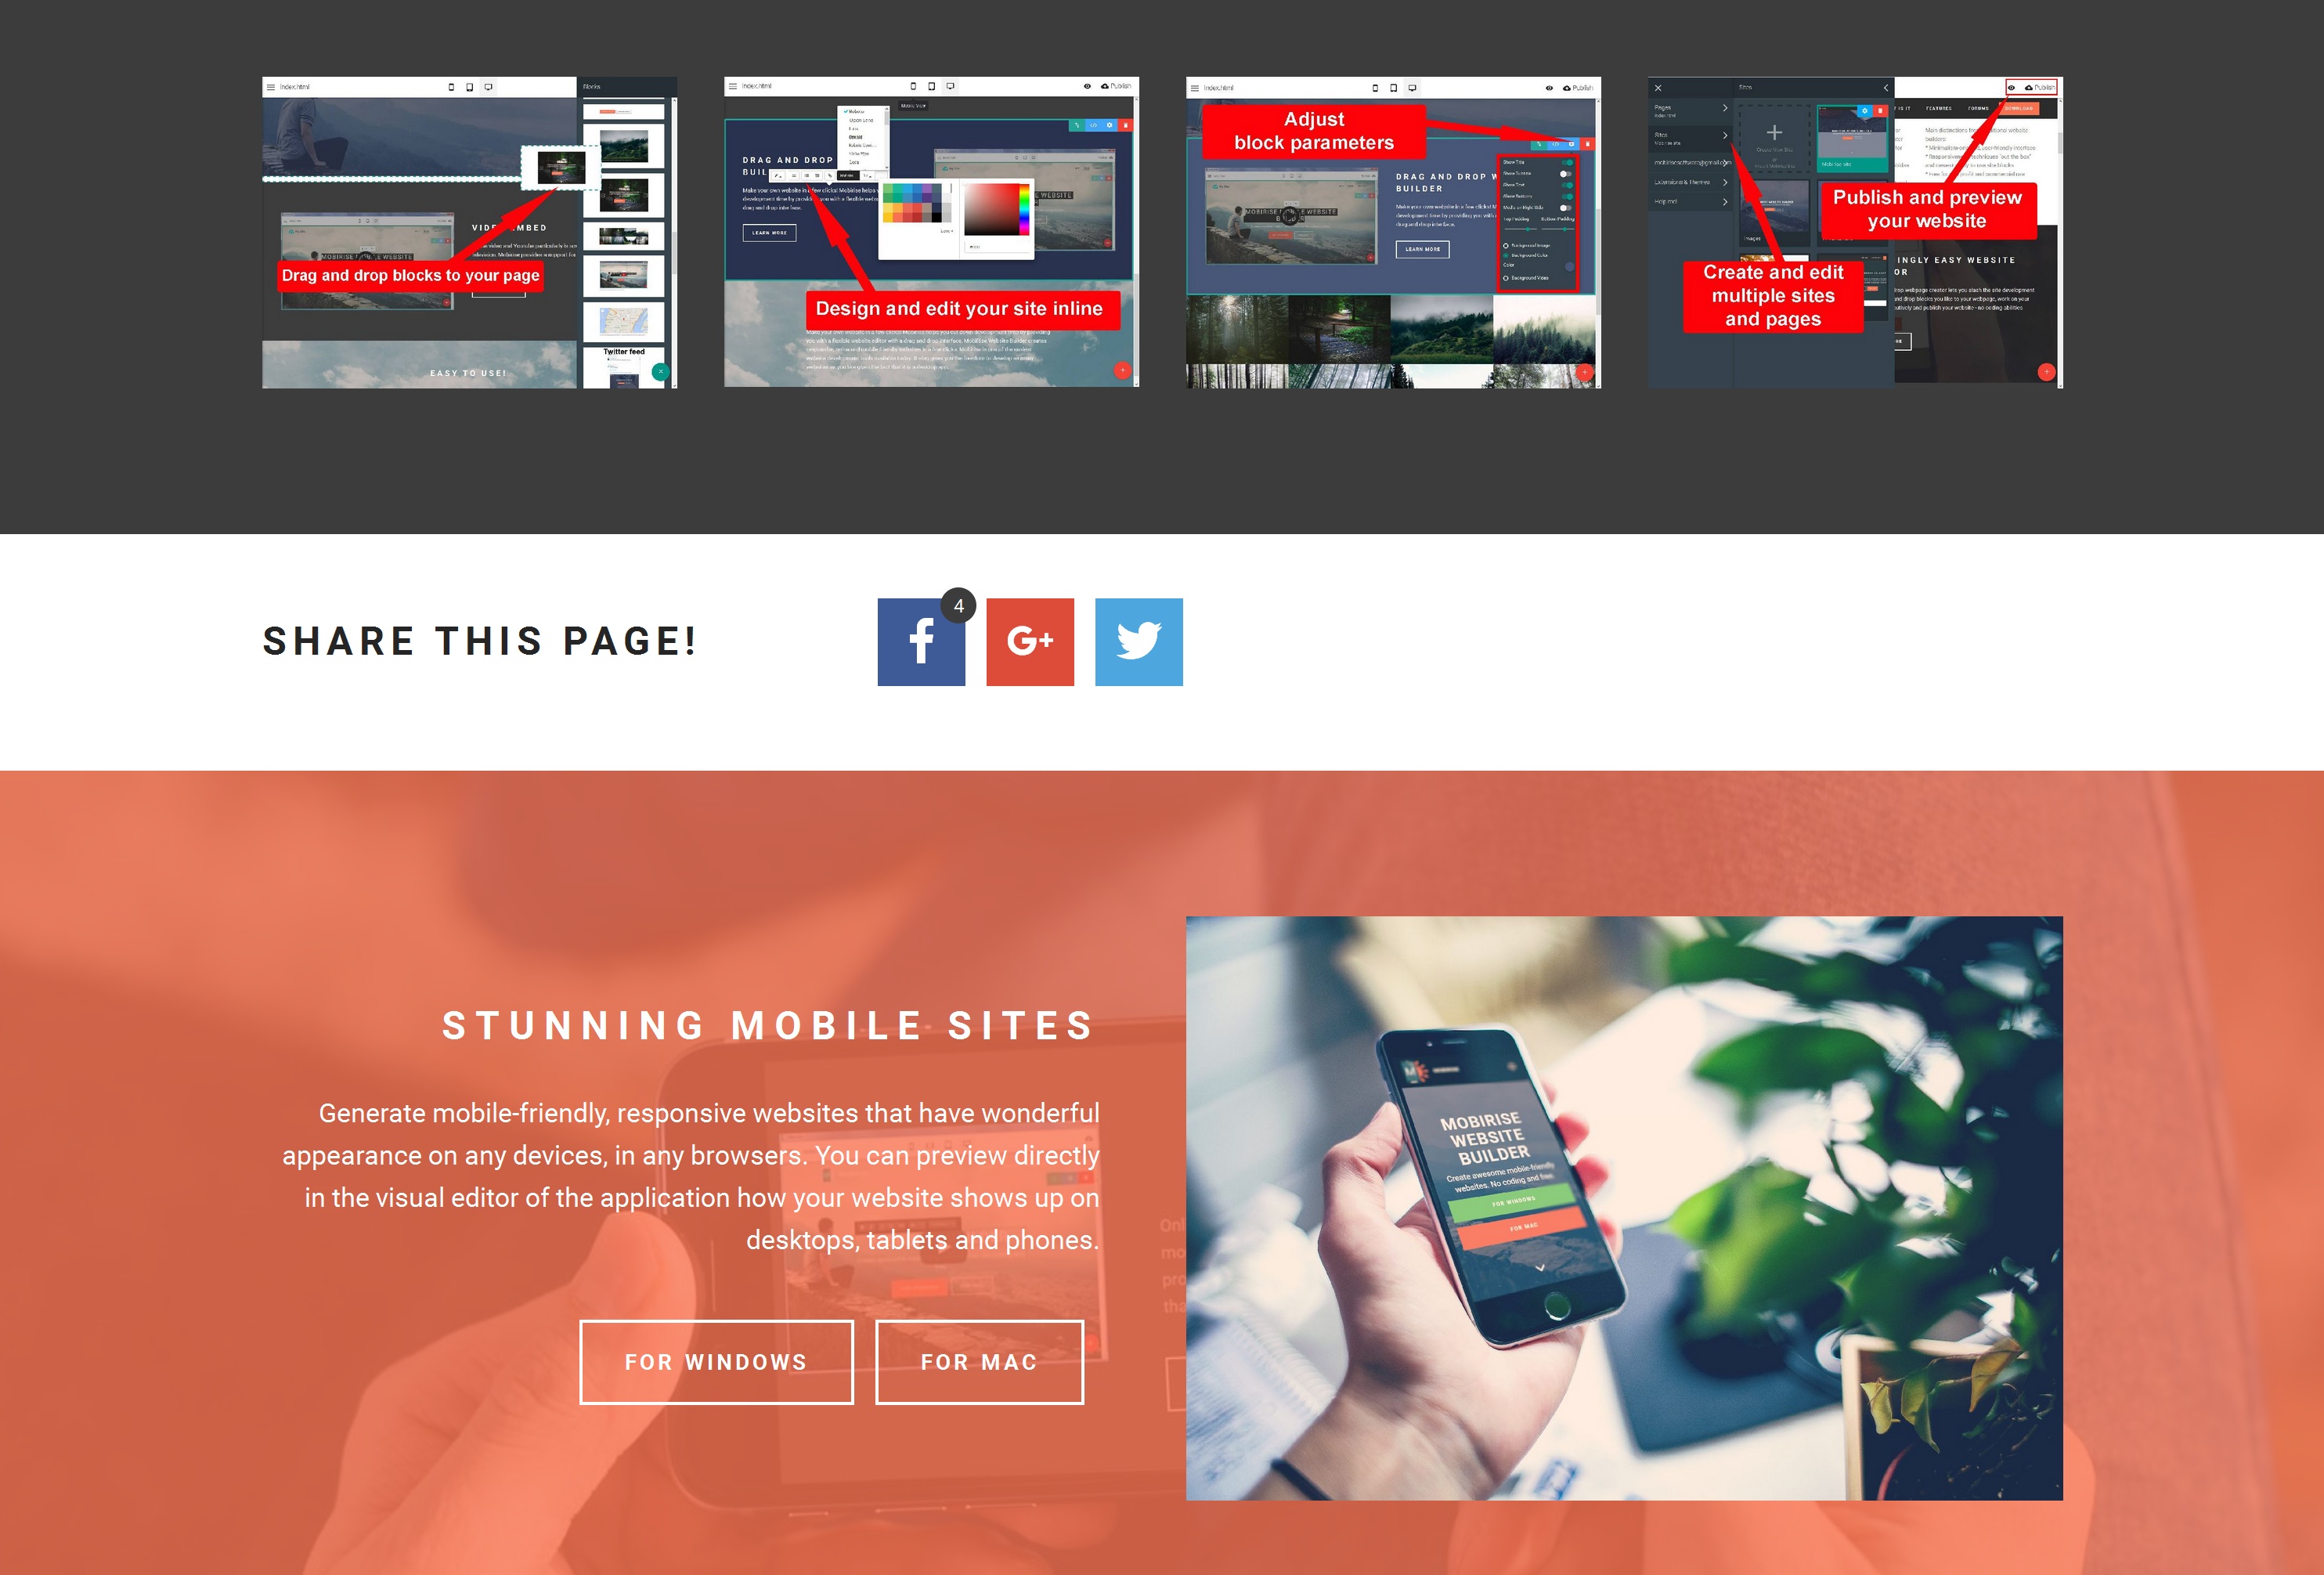  HTML5 Web Page  Builder Review